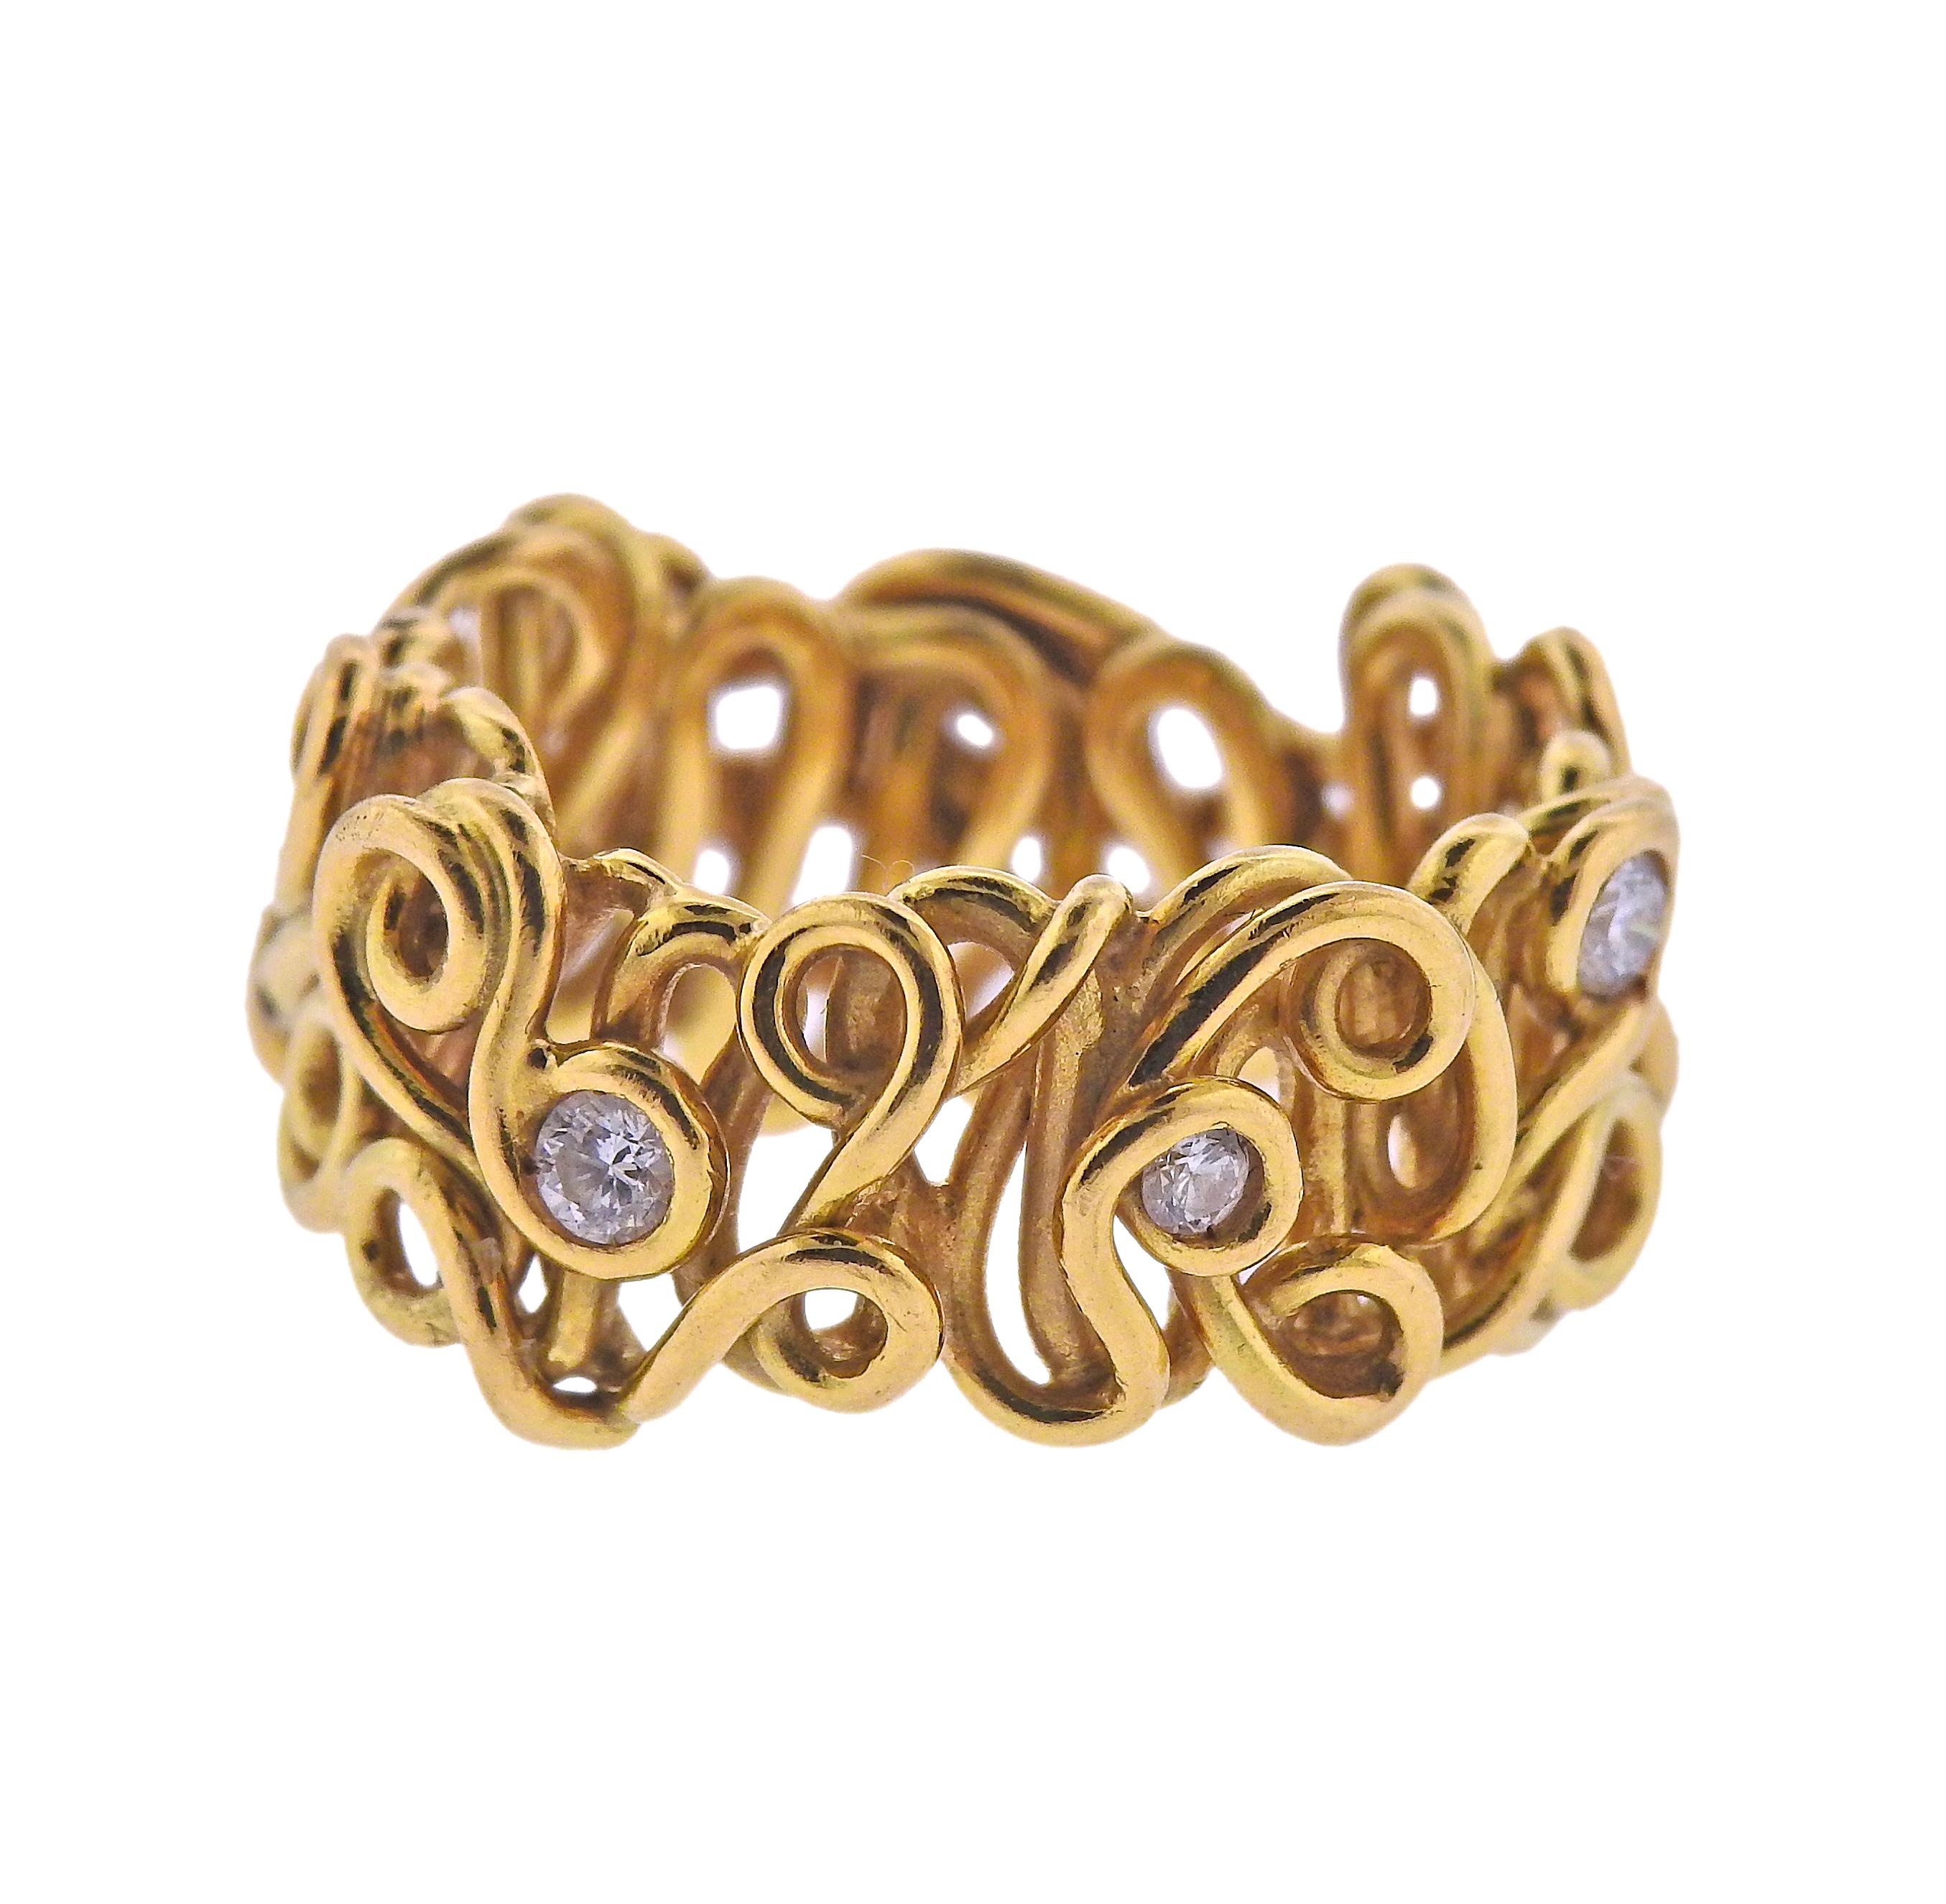 18k yellow gold band ring with intertwined design, adorned with approx. 0.40ctw in diamonds. Ring size - 7, ring is 12mm wide. Weight - 10.1 grams. 